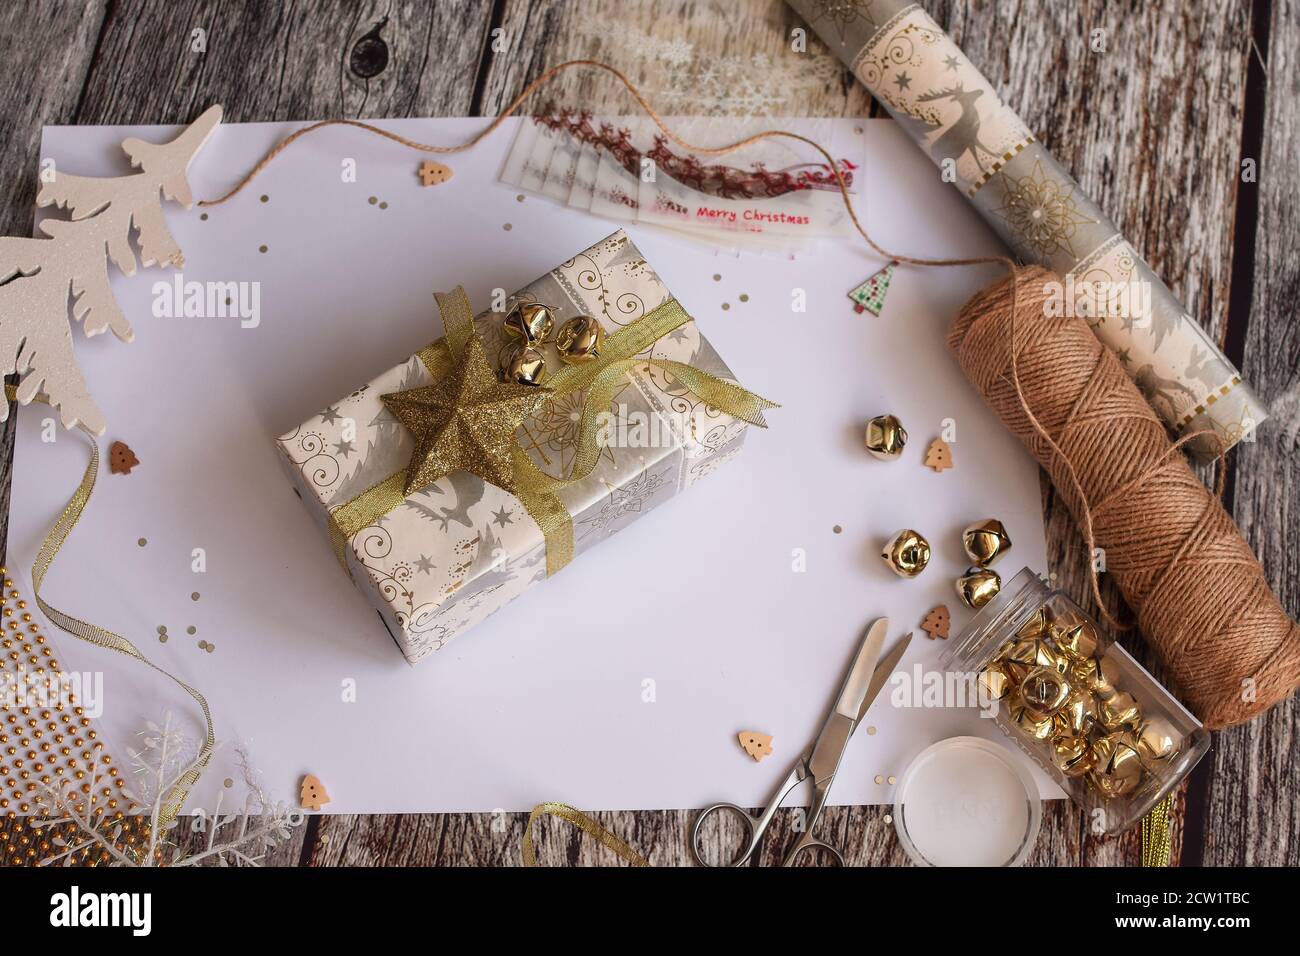 Elegant flatlay layout with space for lettering, preparing for Christmas, with gift box, scissors, snowflake on wooden background.  Stock Photo